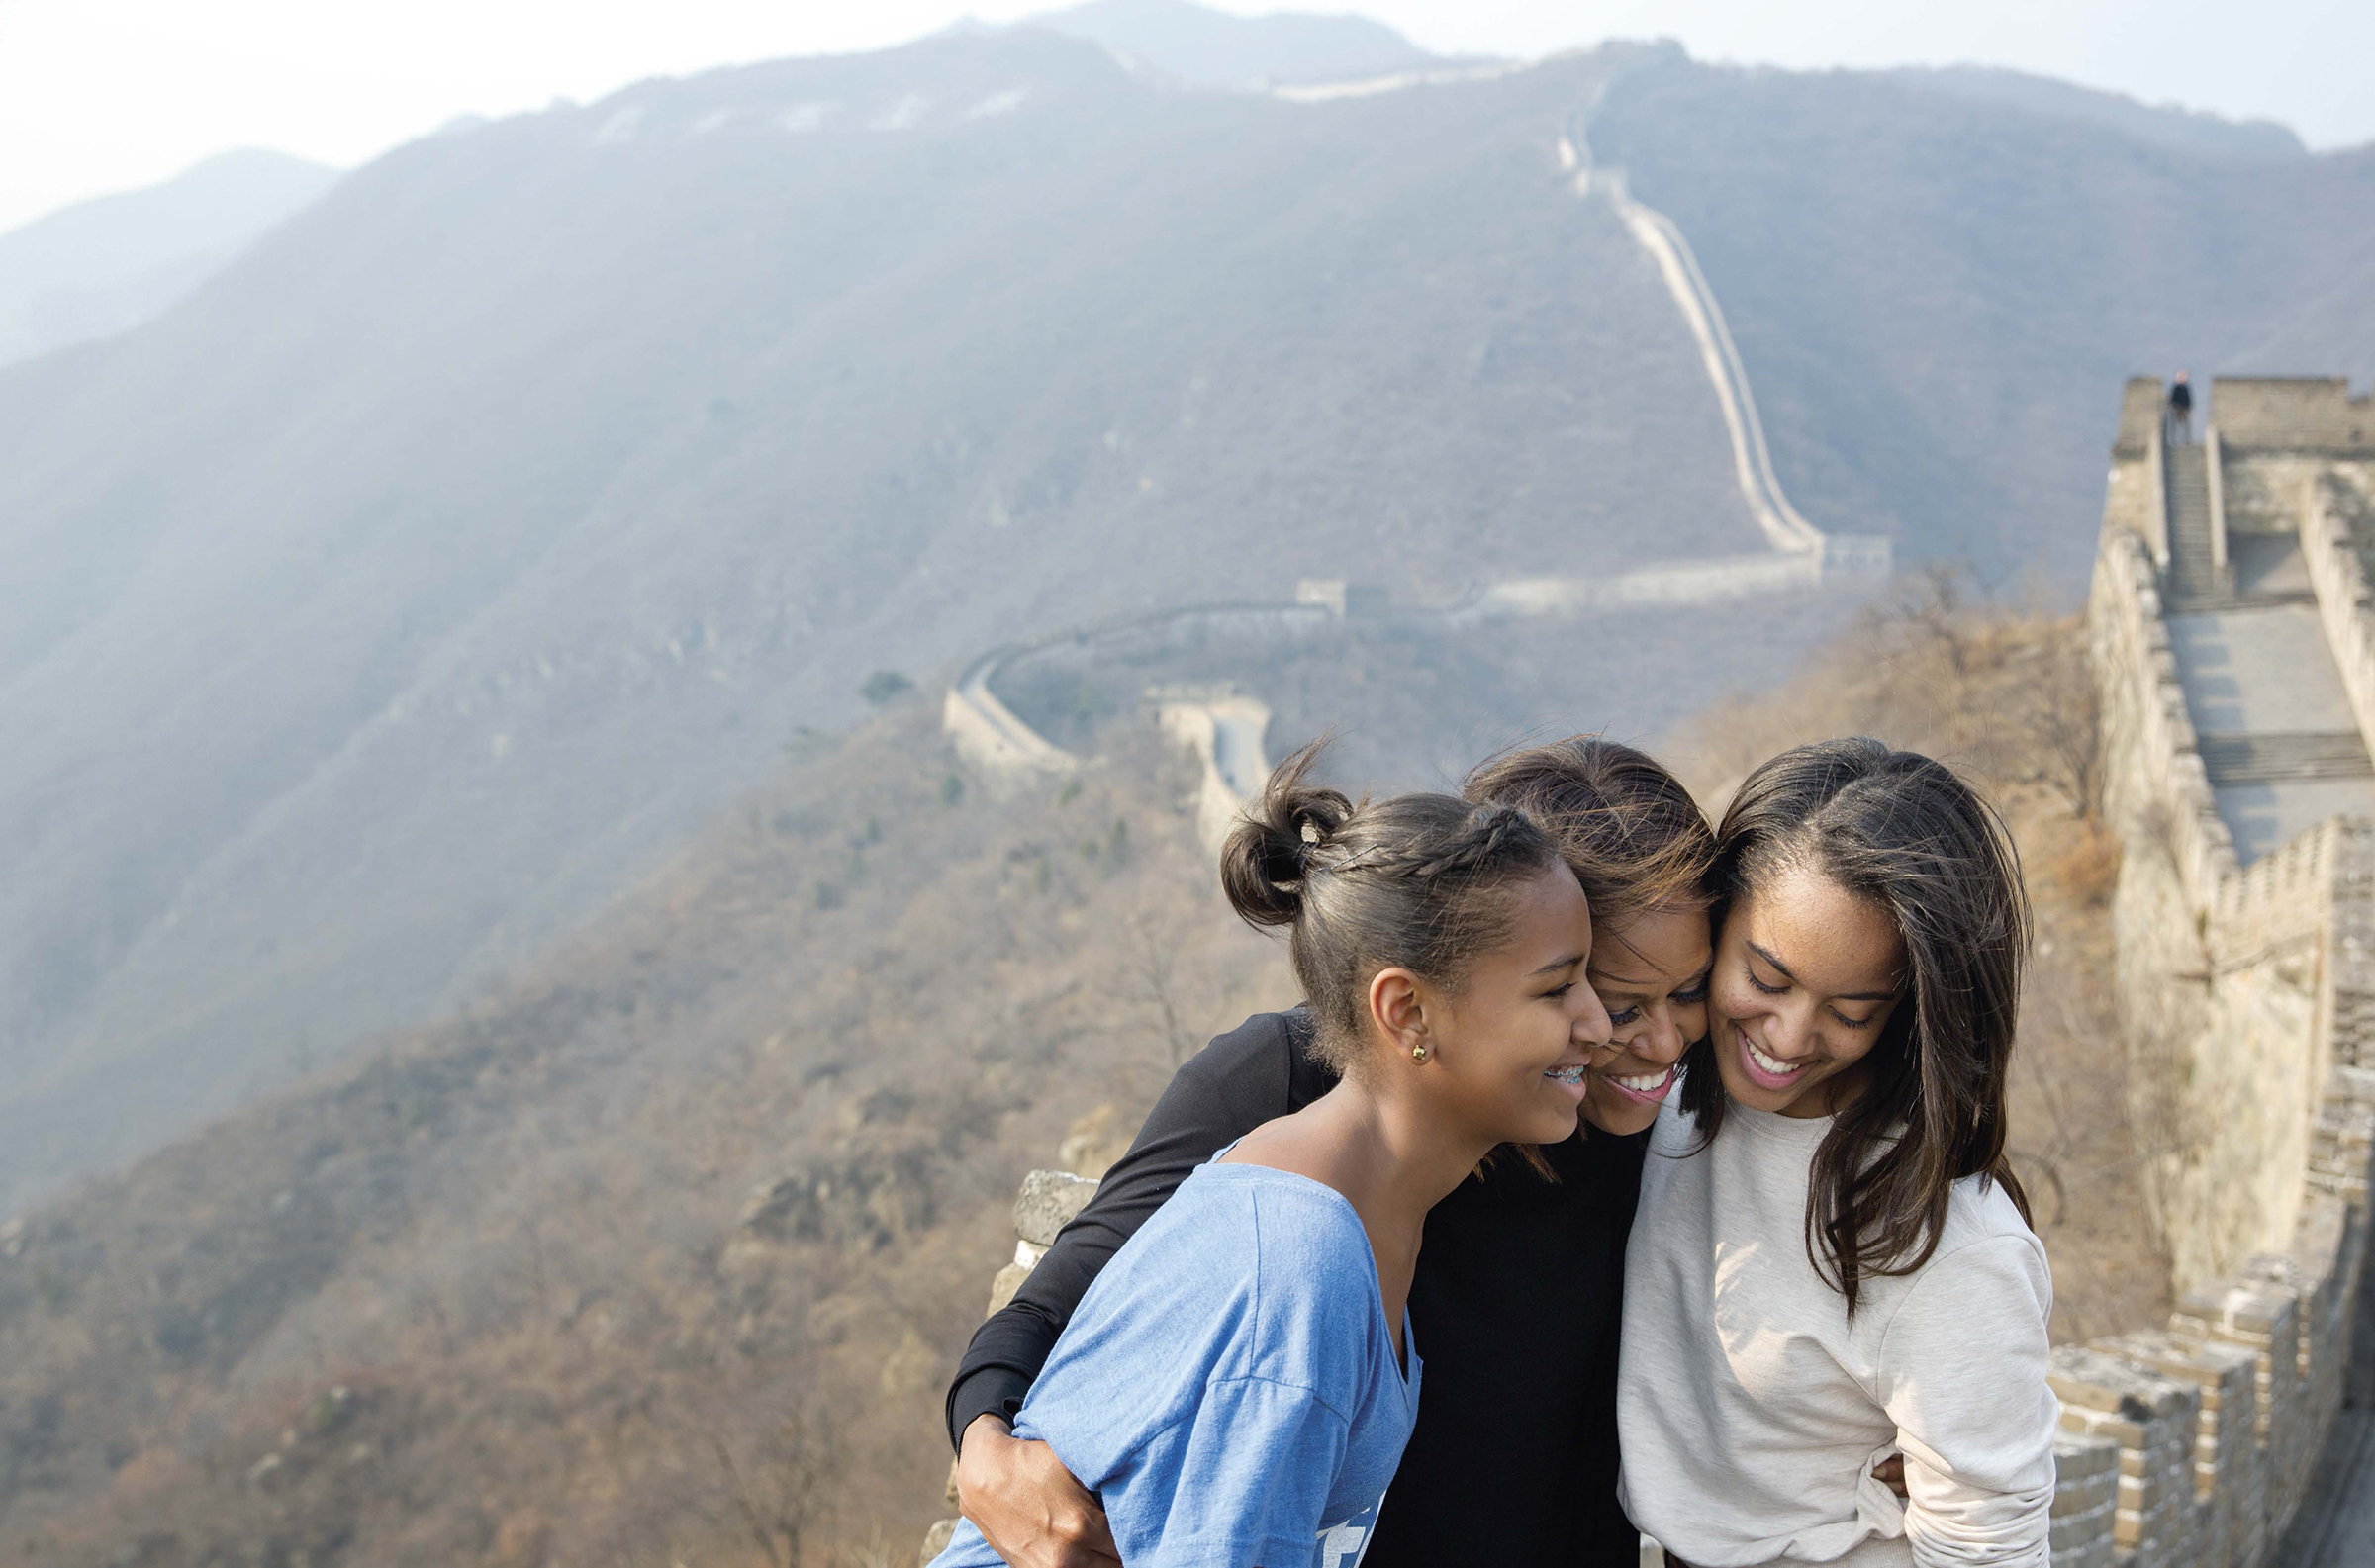 PHOTO: The First Lady hugs her daughters Sasha and Malia as they visit the Great Wall of China in Mutianyu, China, March 23, 2014. 